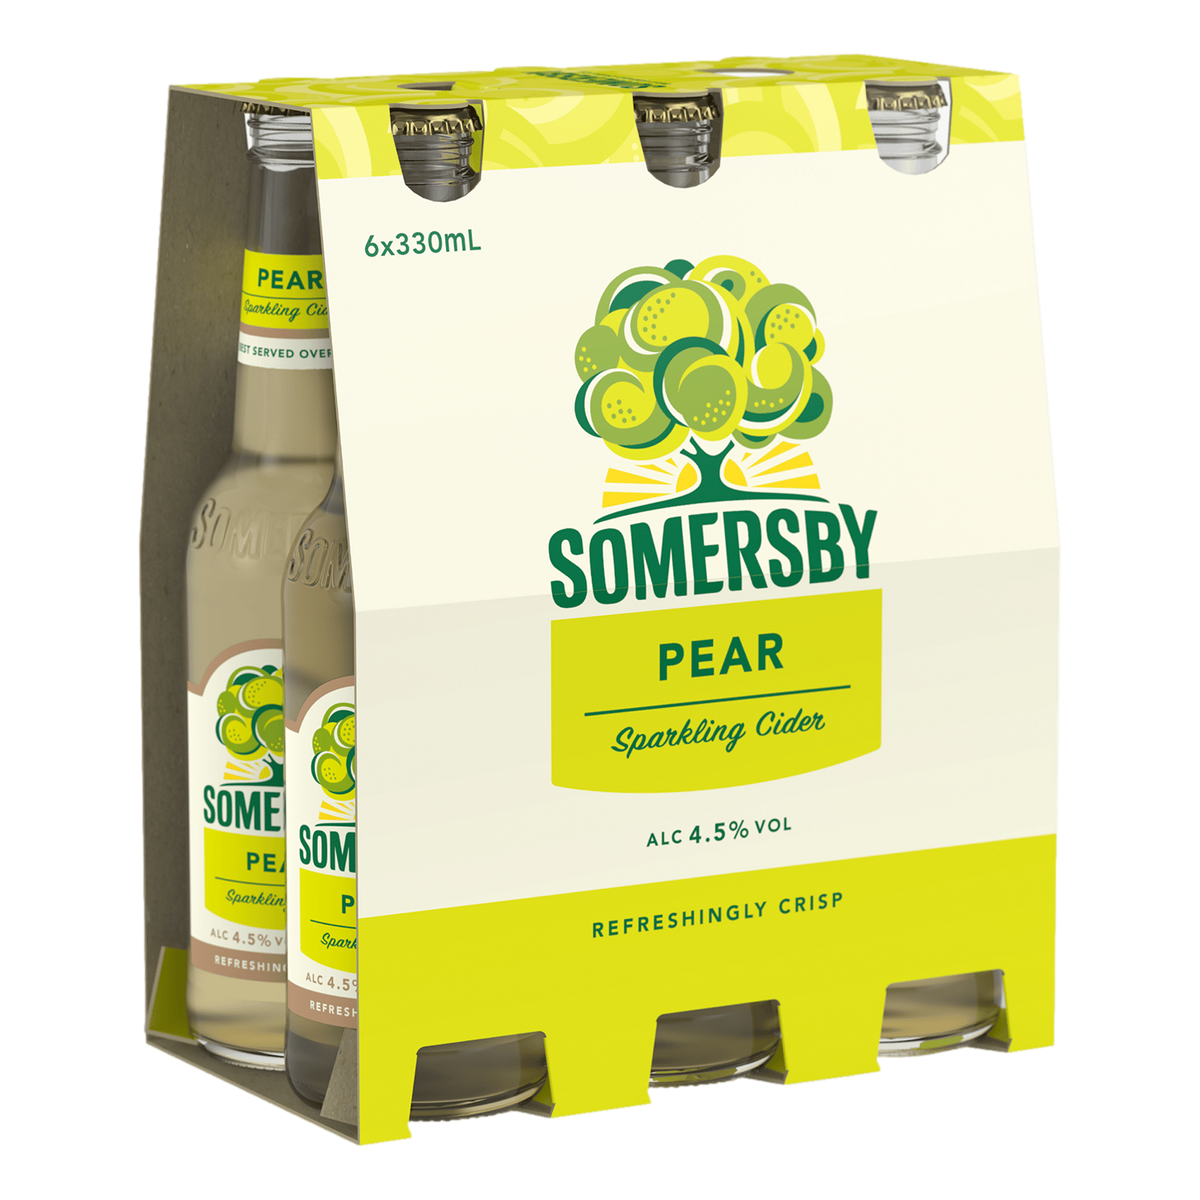 Somersby Pear Cider 330ml Bottle 6 Pack